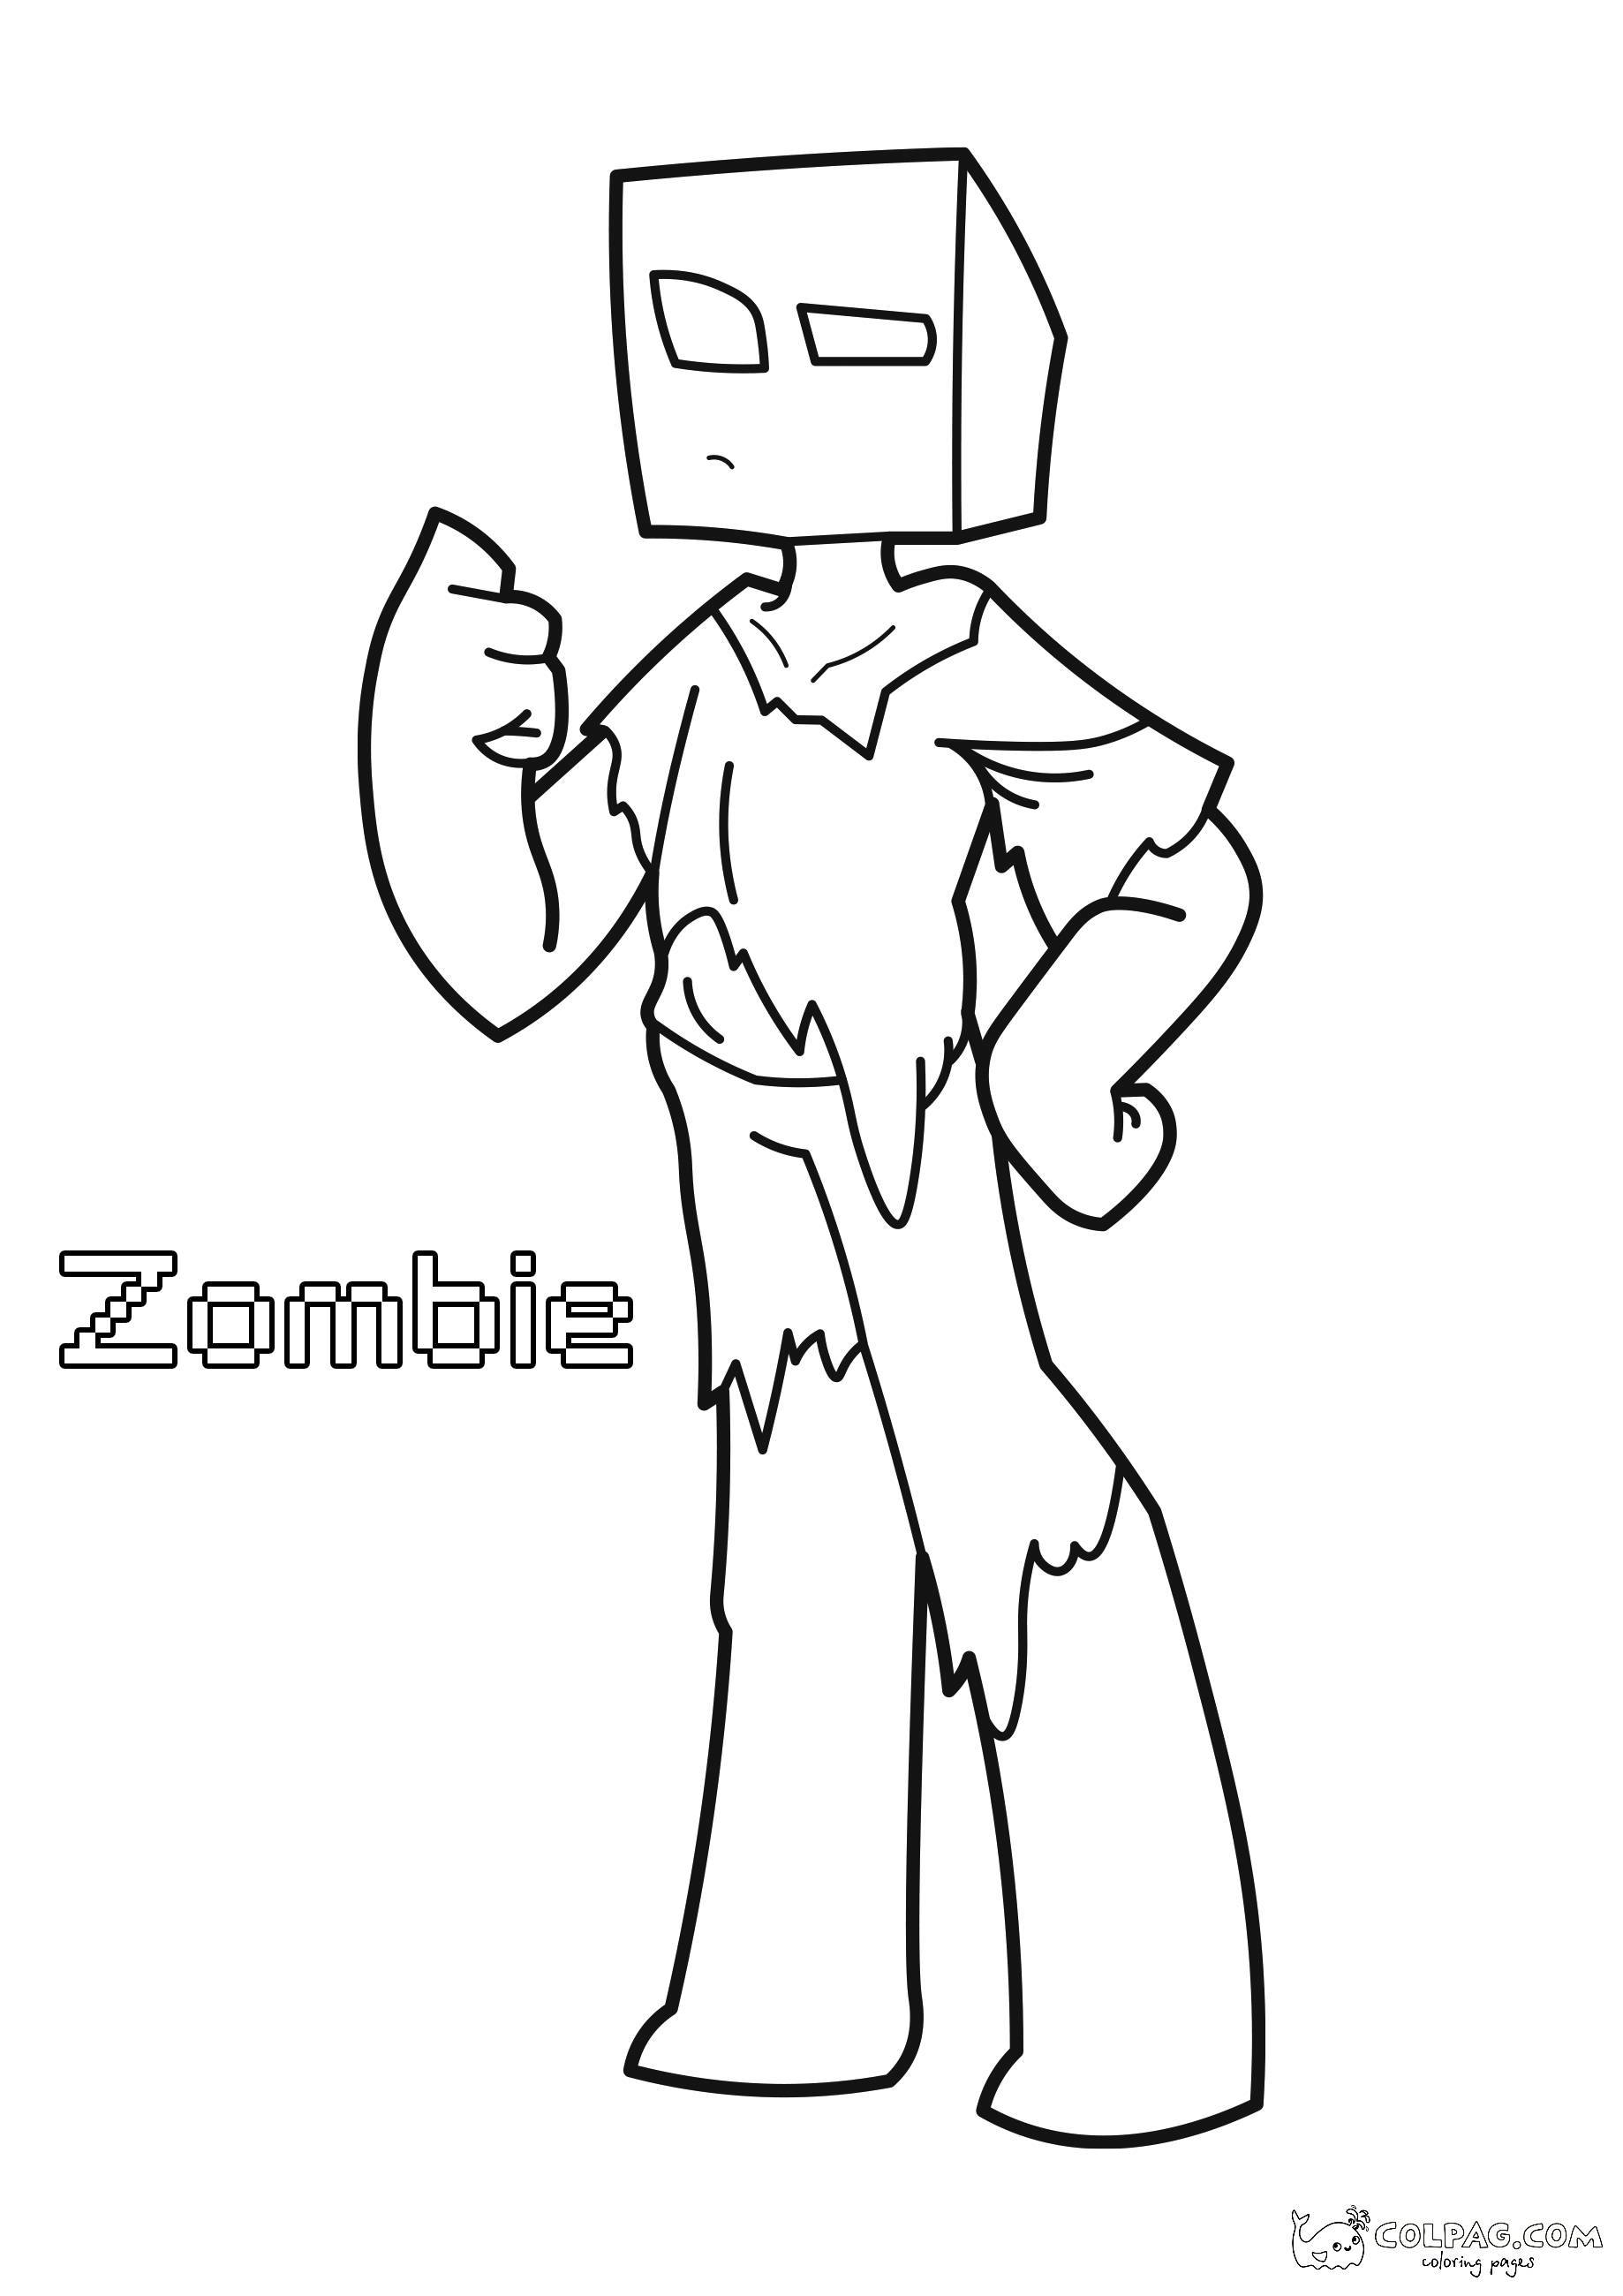 zombie-1-minecraft-coloring-page-colpag